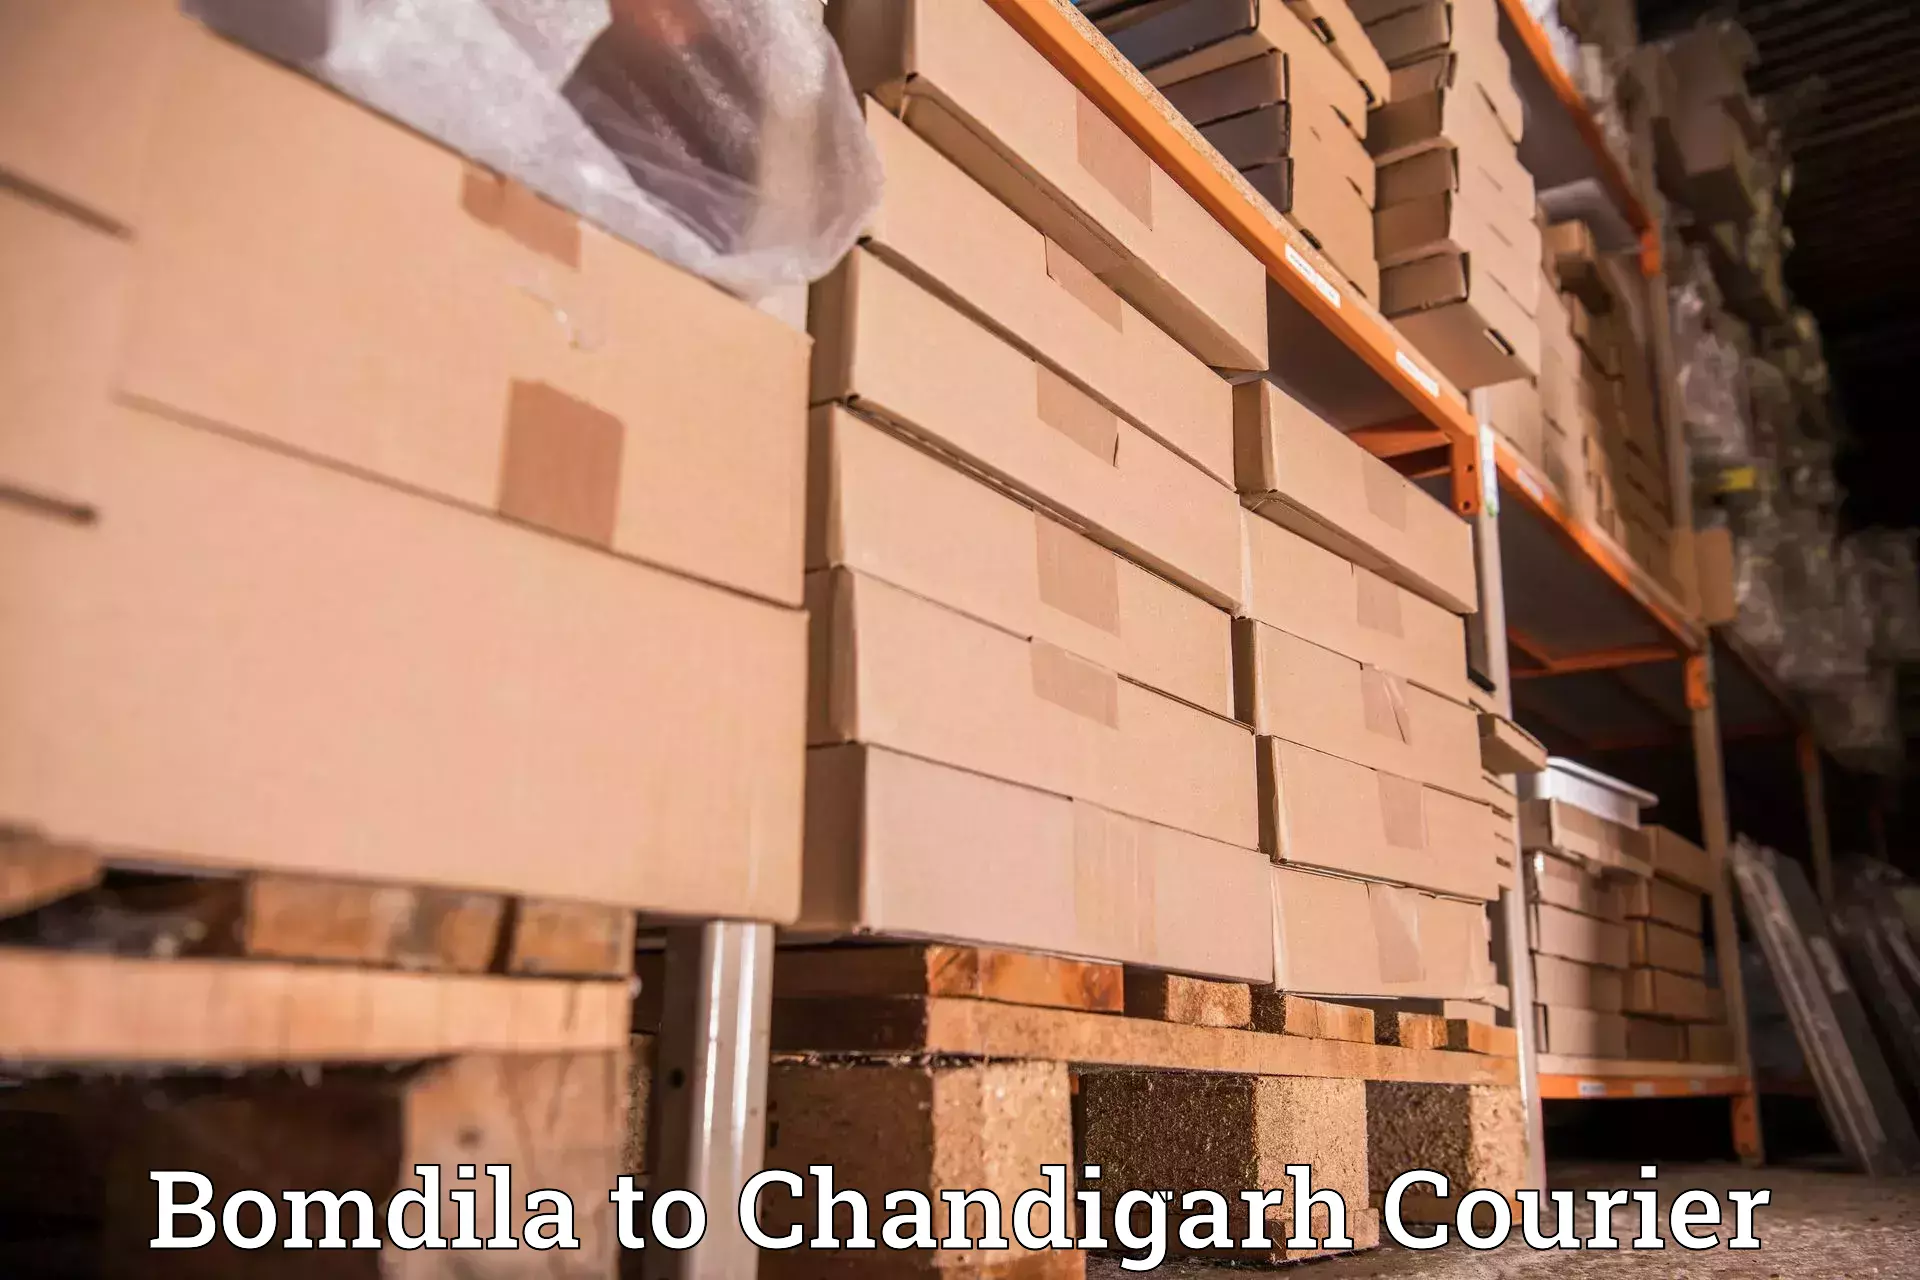 Flexible delivery schedules Bomdila to Chandigarh